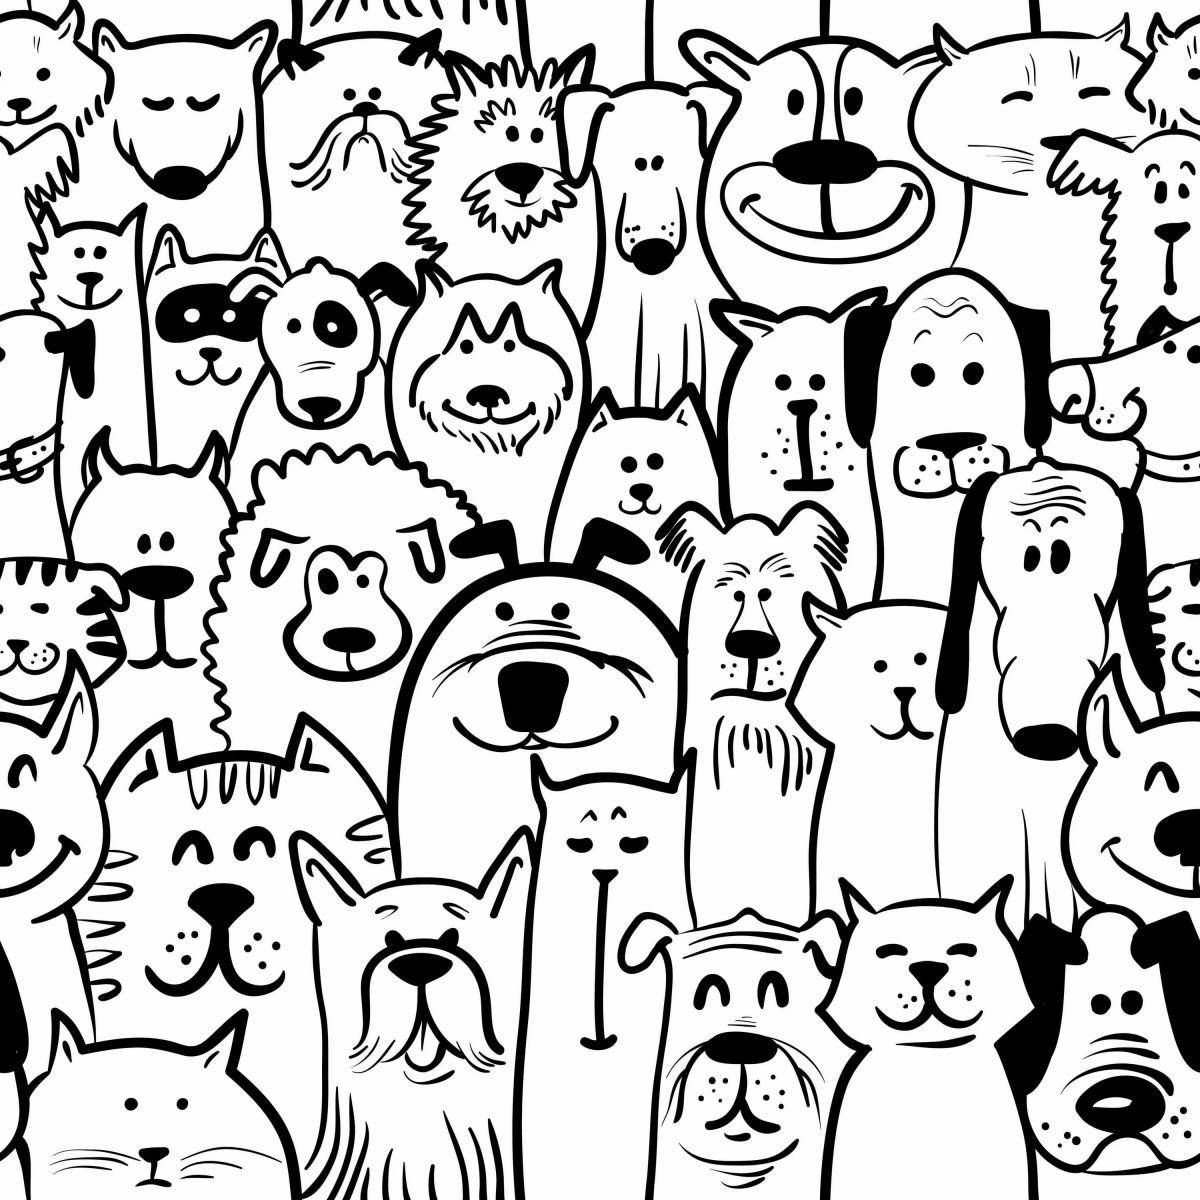 Bright many cats on one page